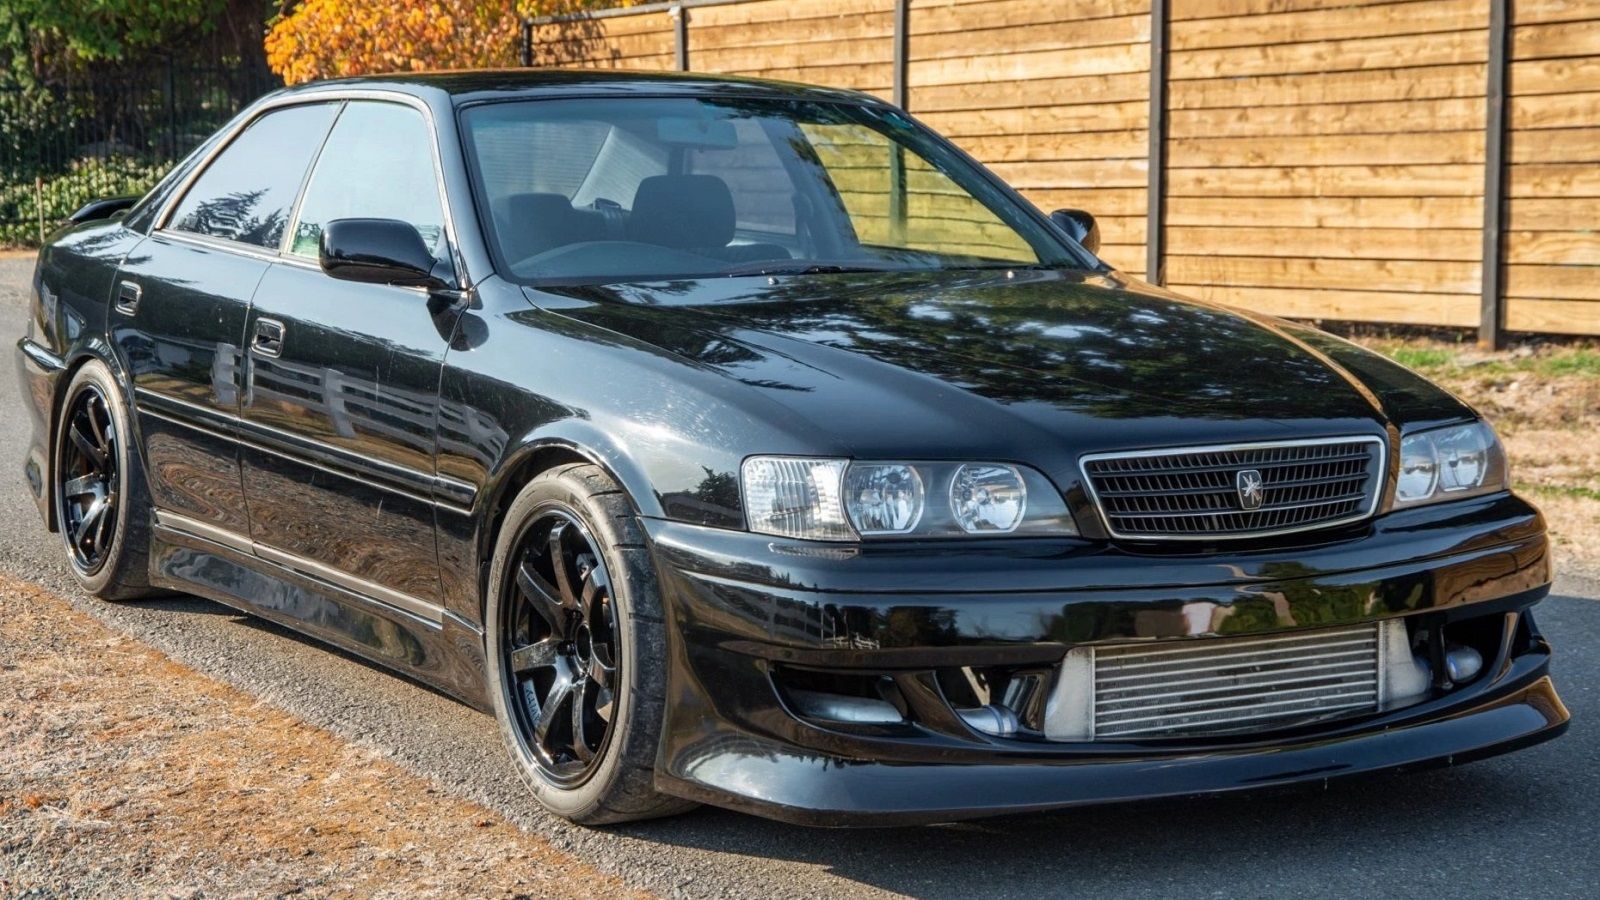 A parked 1997 Toyota Chaser Tourer